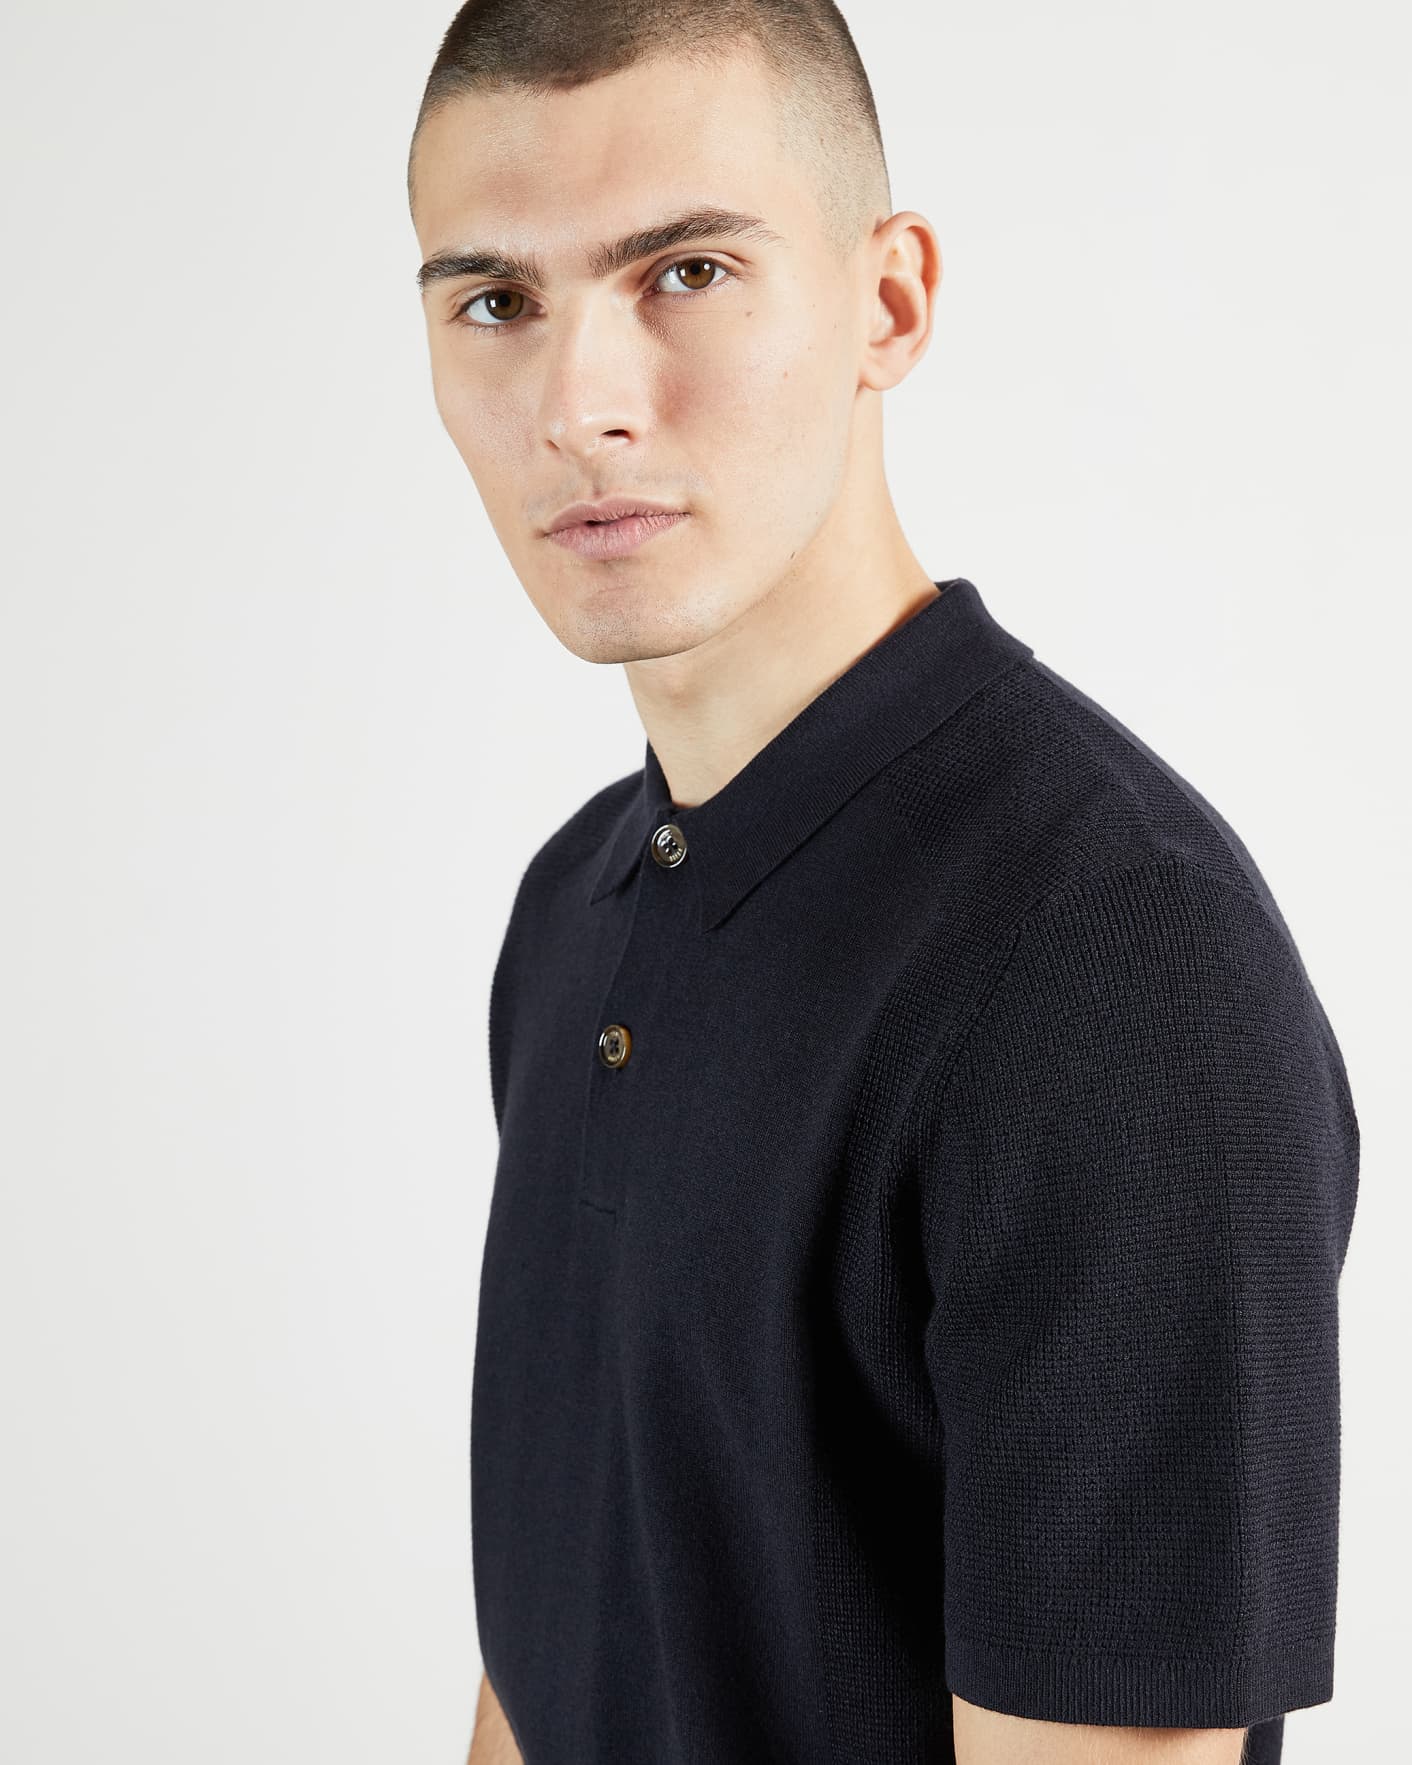 Navy Short Sleeve Knitted Polo Ted Baker